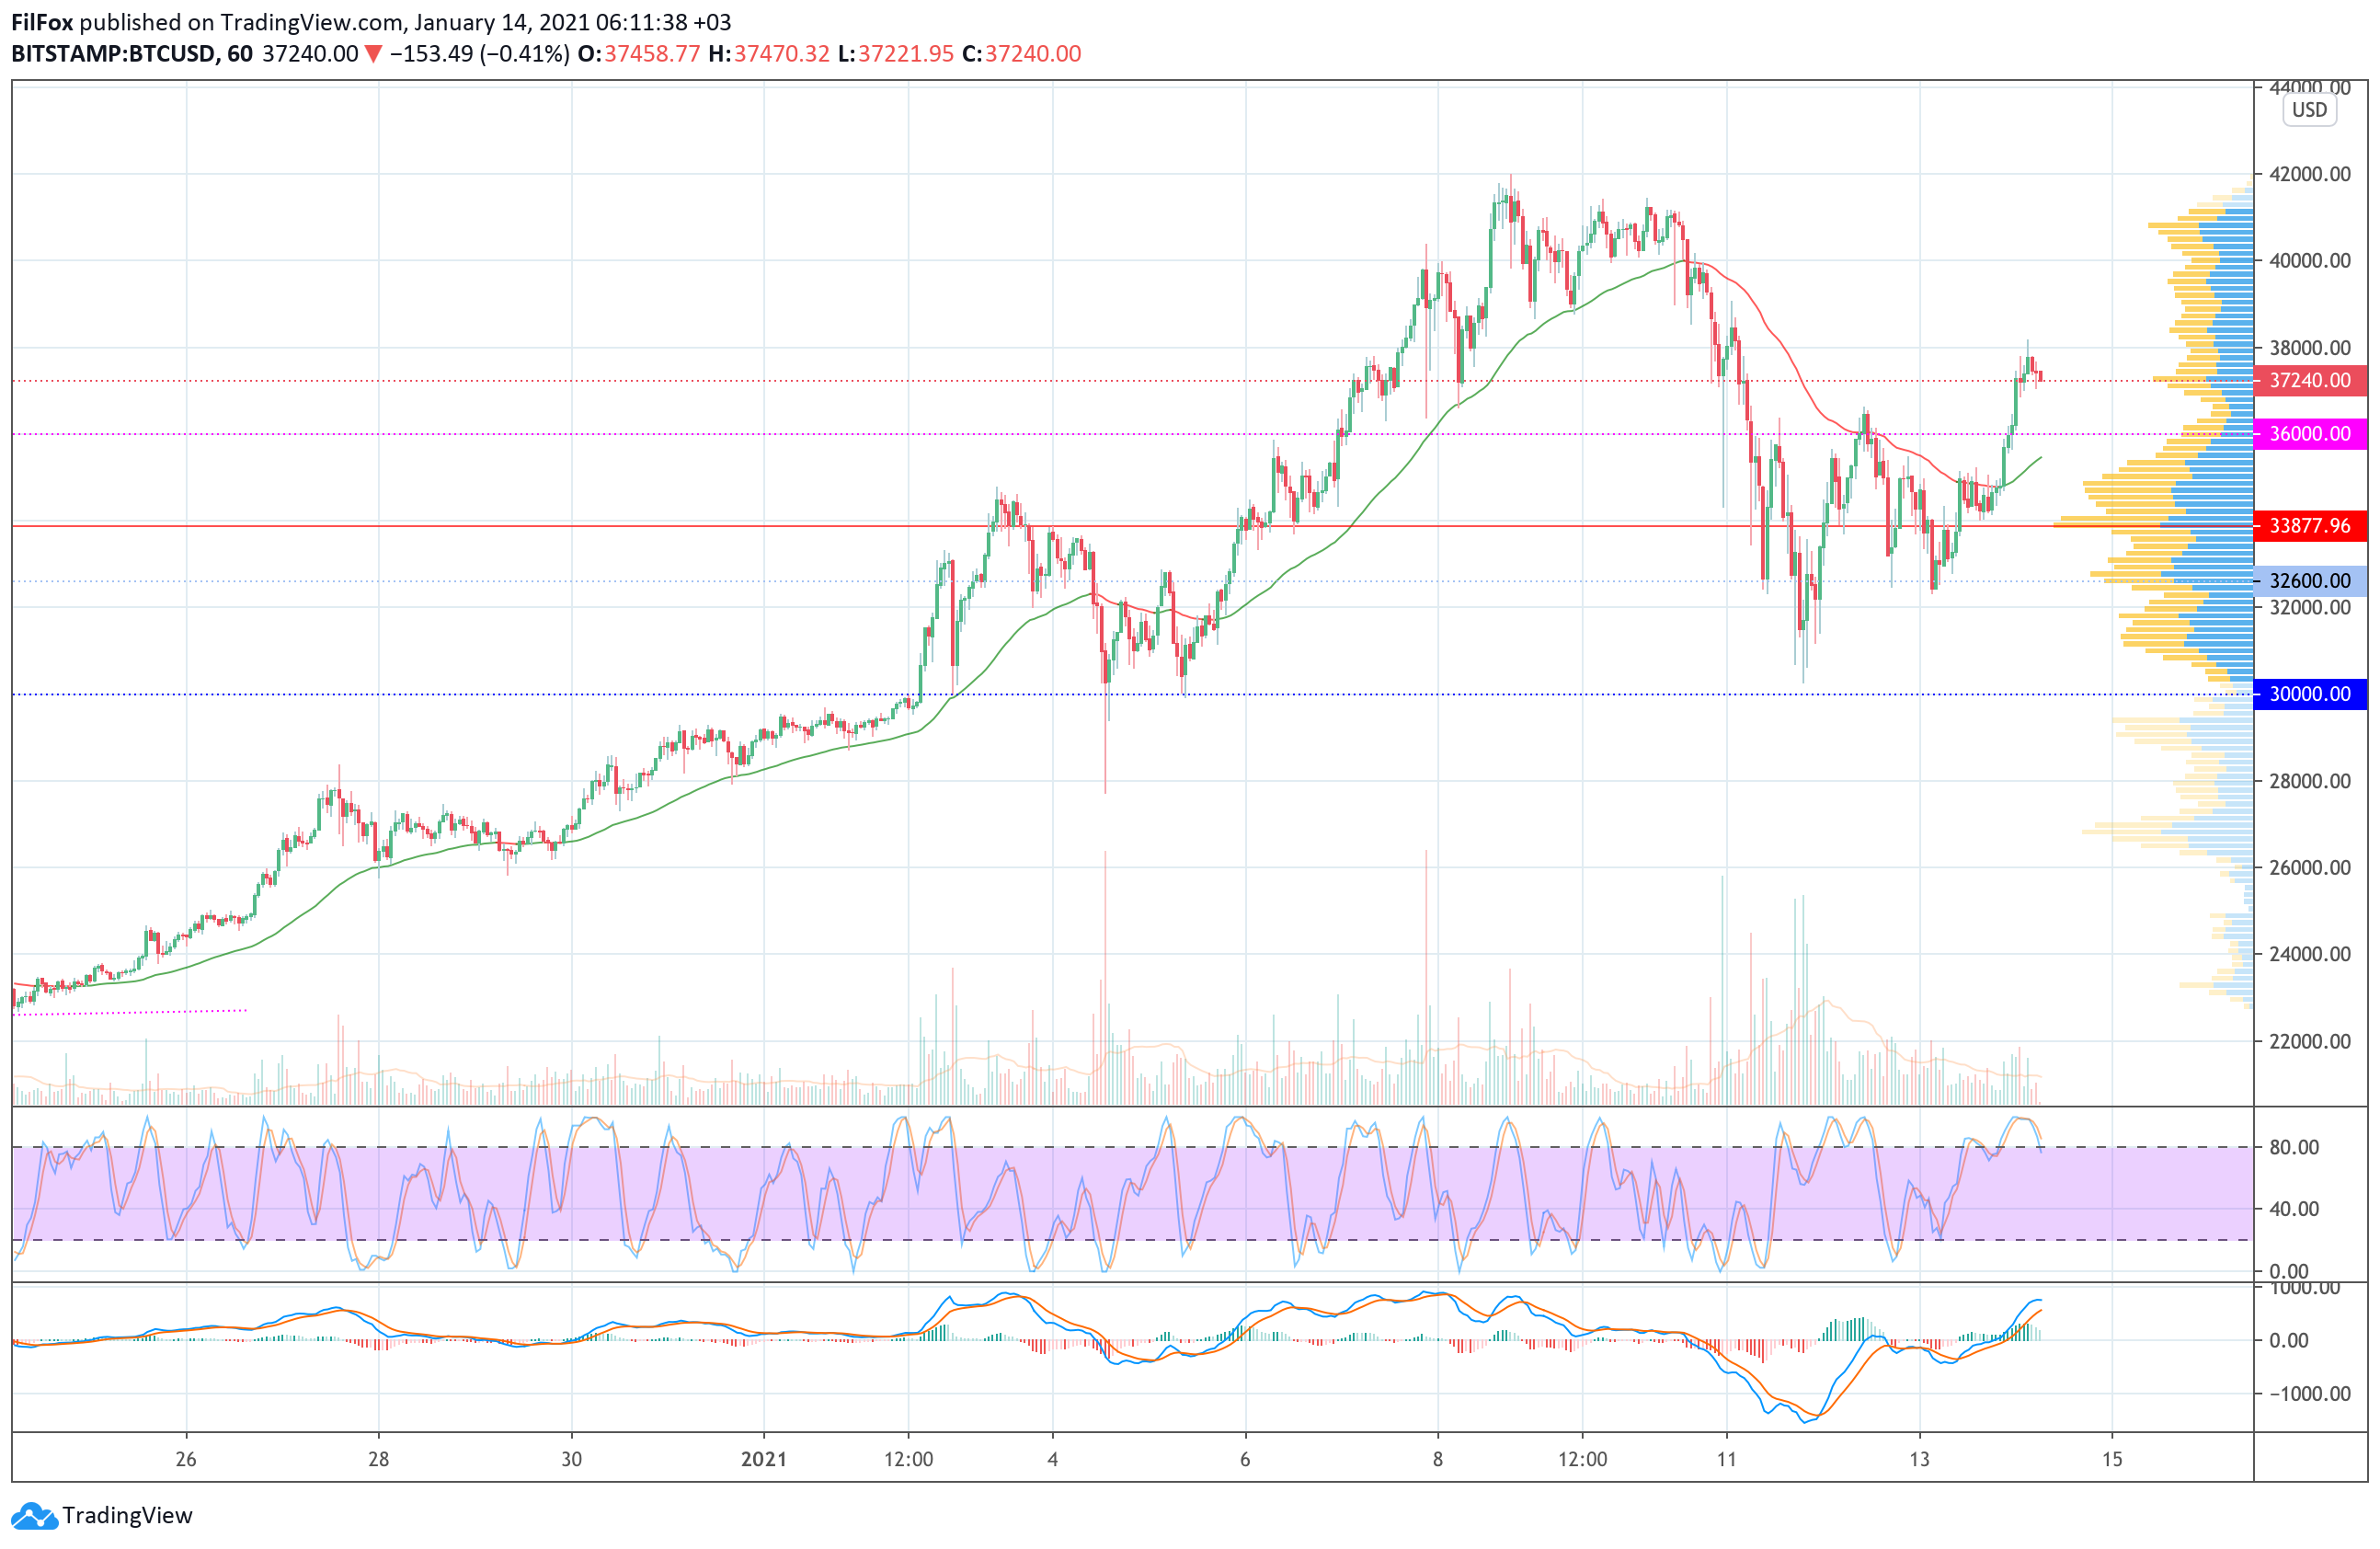 Analysis of prices for Bitcoin, Ethereum, Ripple for 01/14/2021